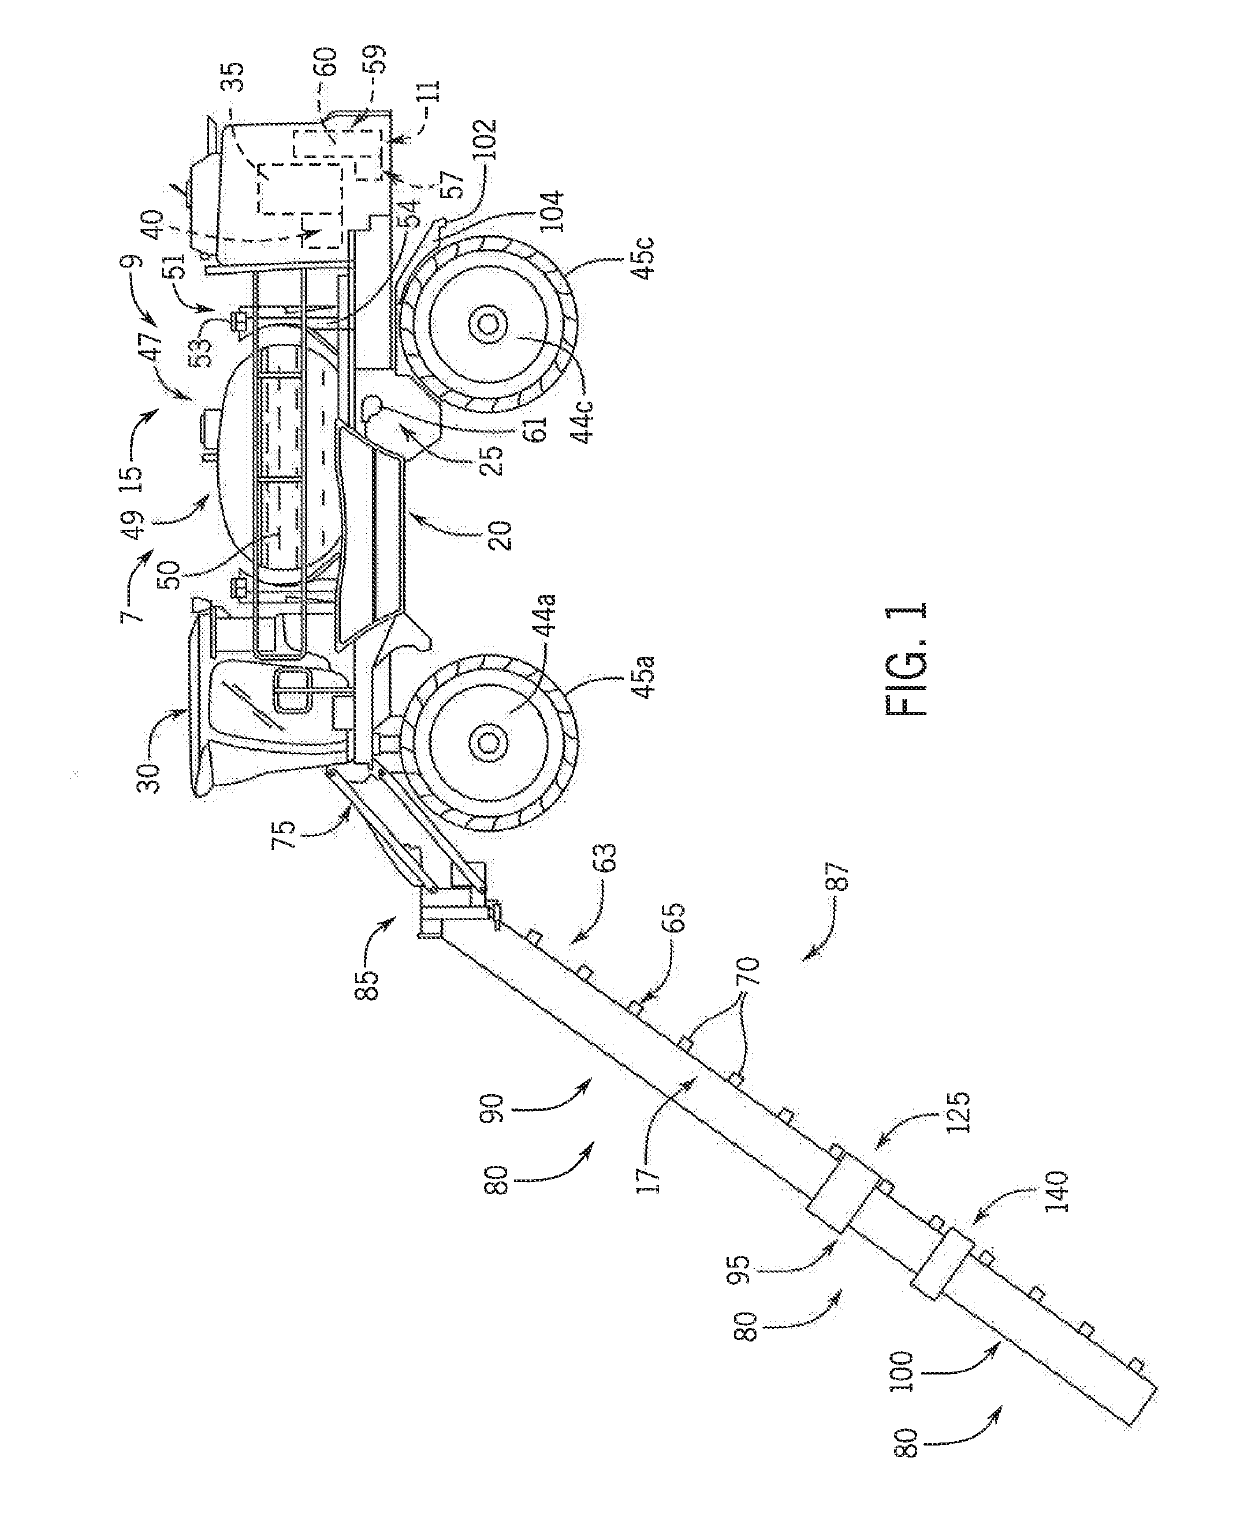 Suspension Control System Providing Closed Loop Control Of Hydraulic Fluid Volumes For An Agricultural Machine